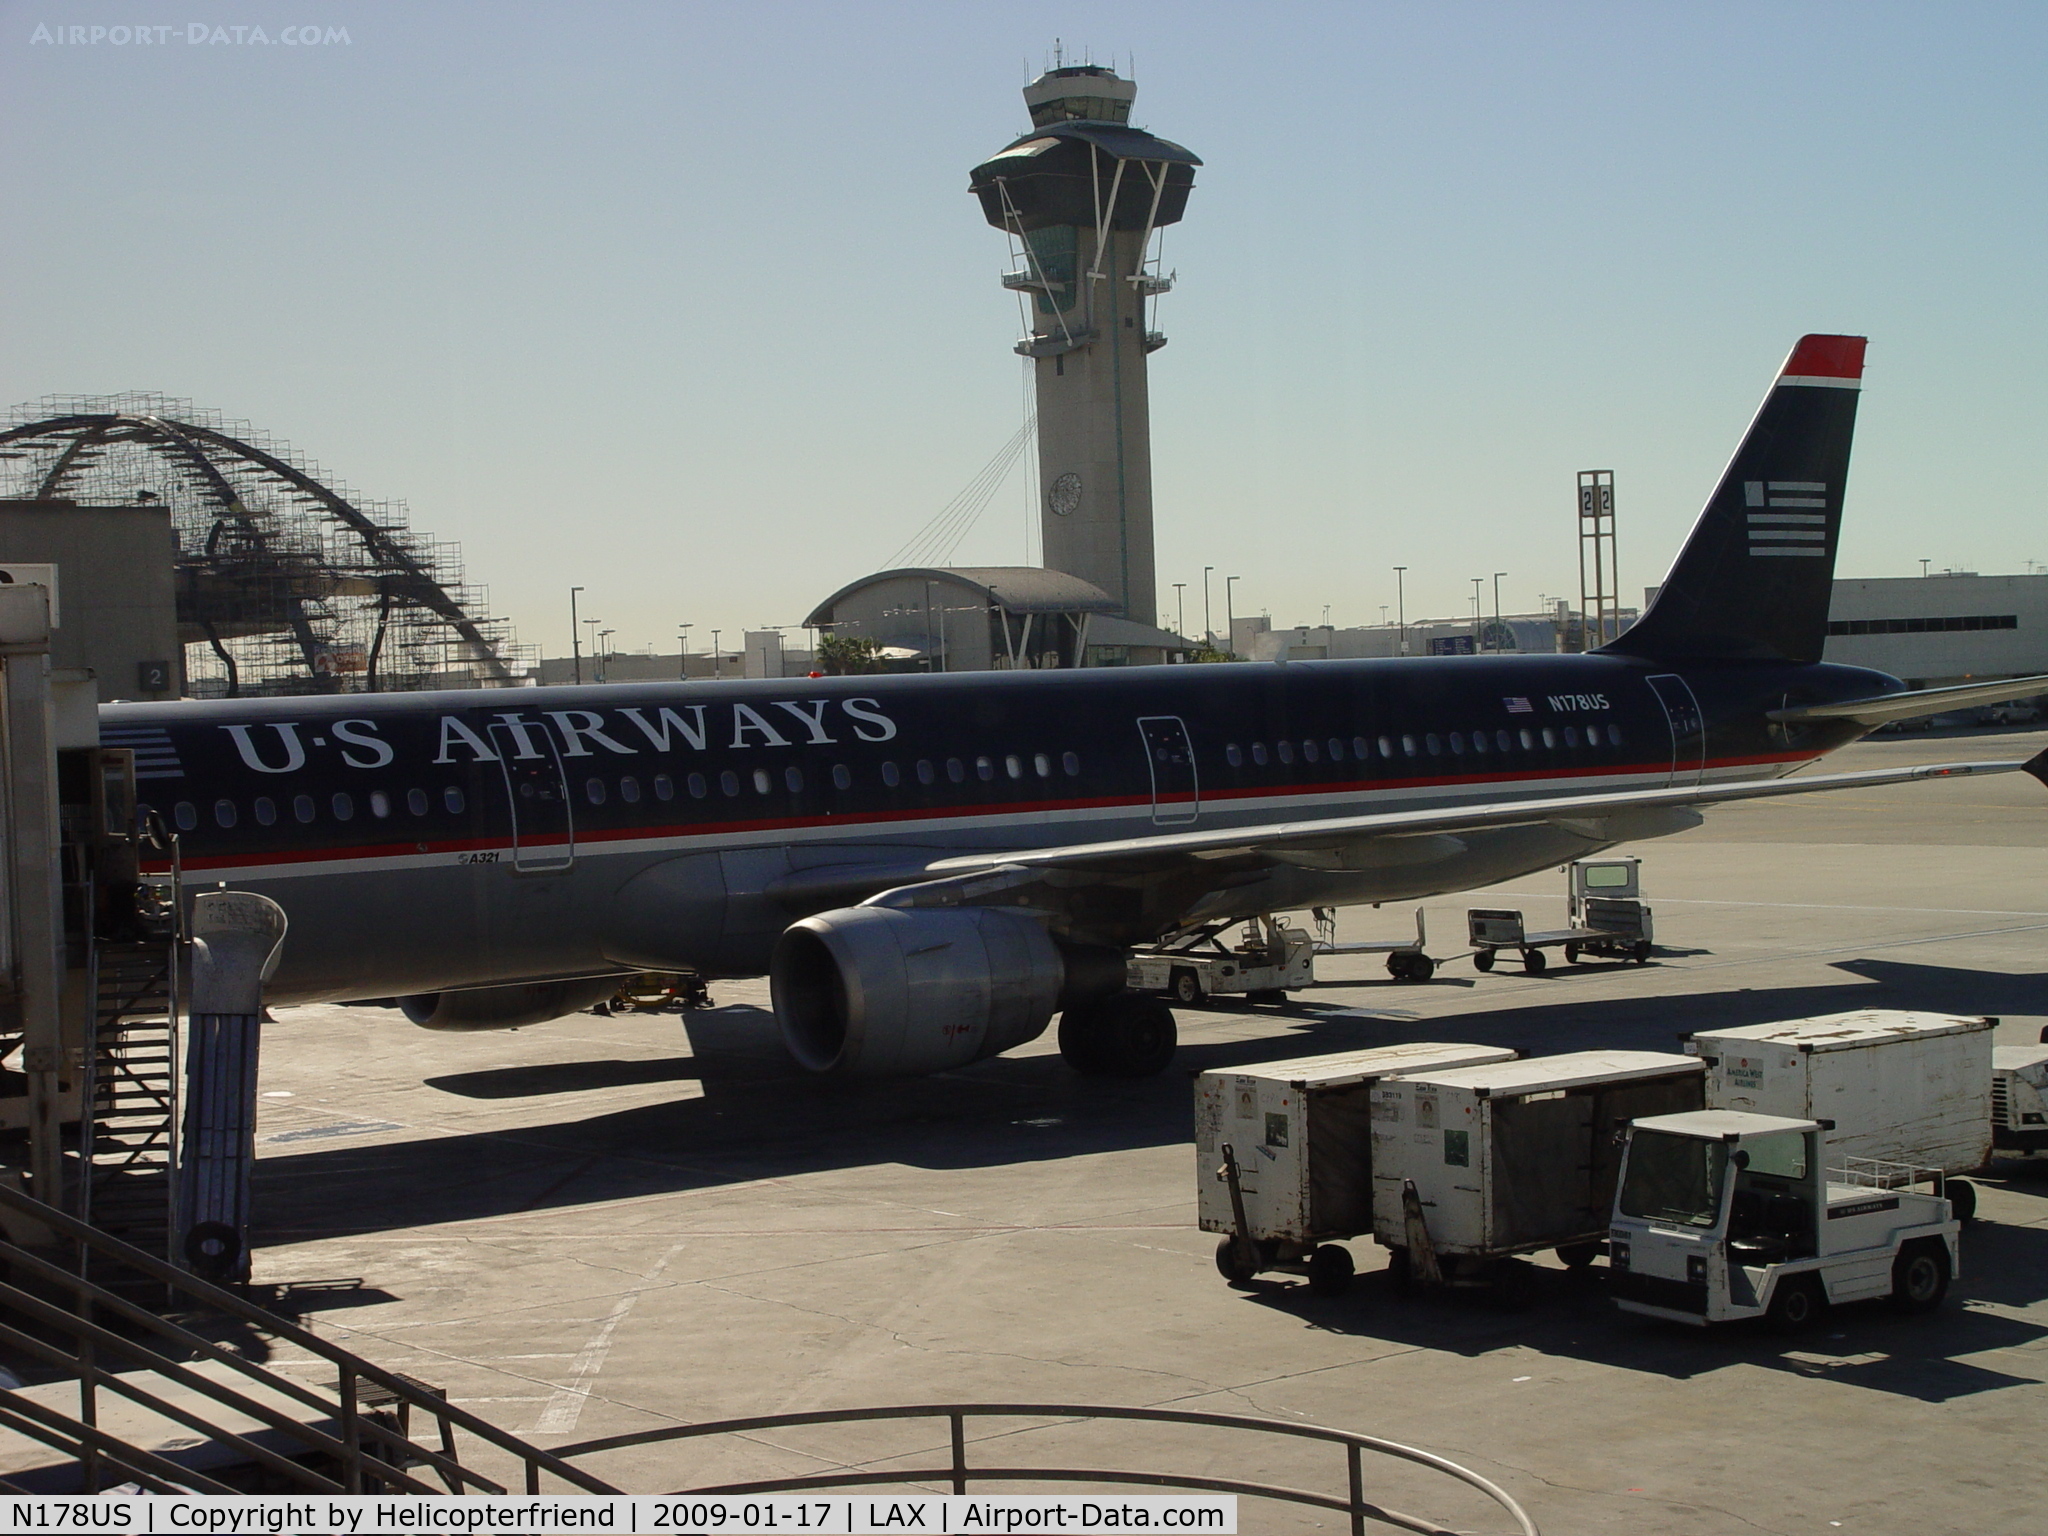 N178US, 2001 Airbus A321-211 C/N 1519, US Airways taking on passengers and luggage at LAX